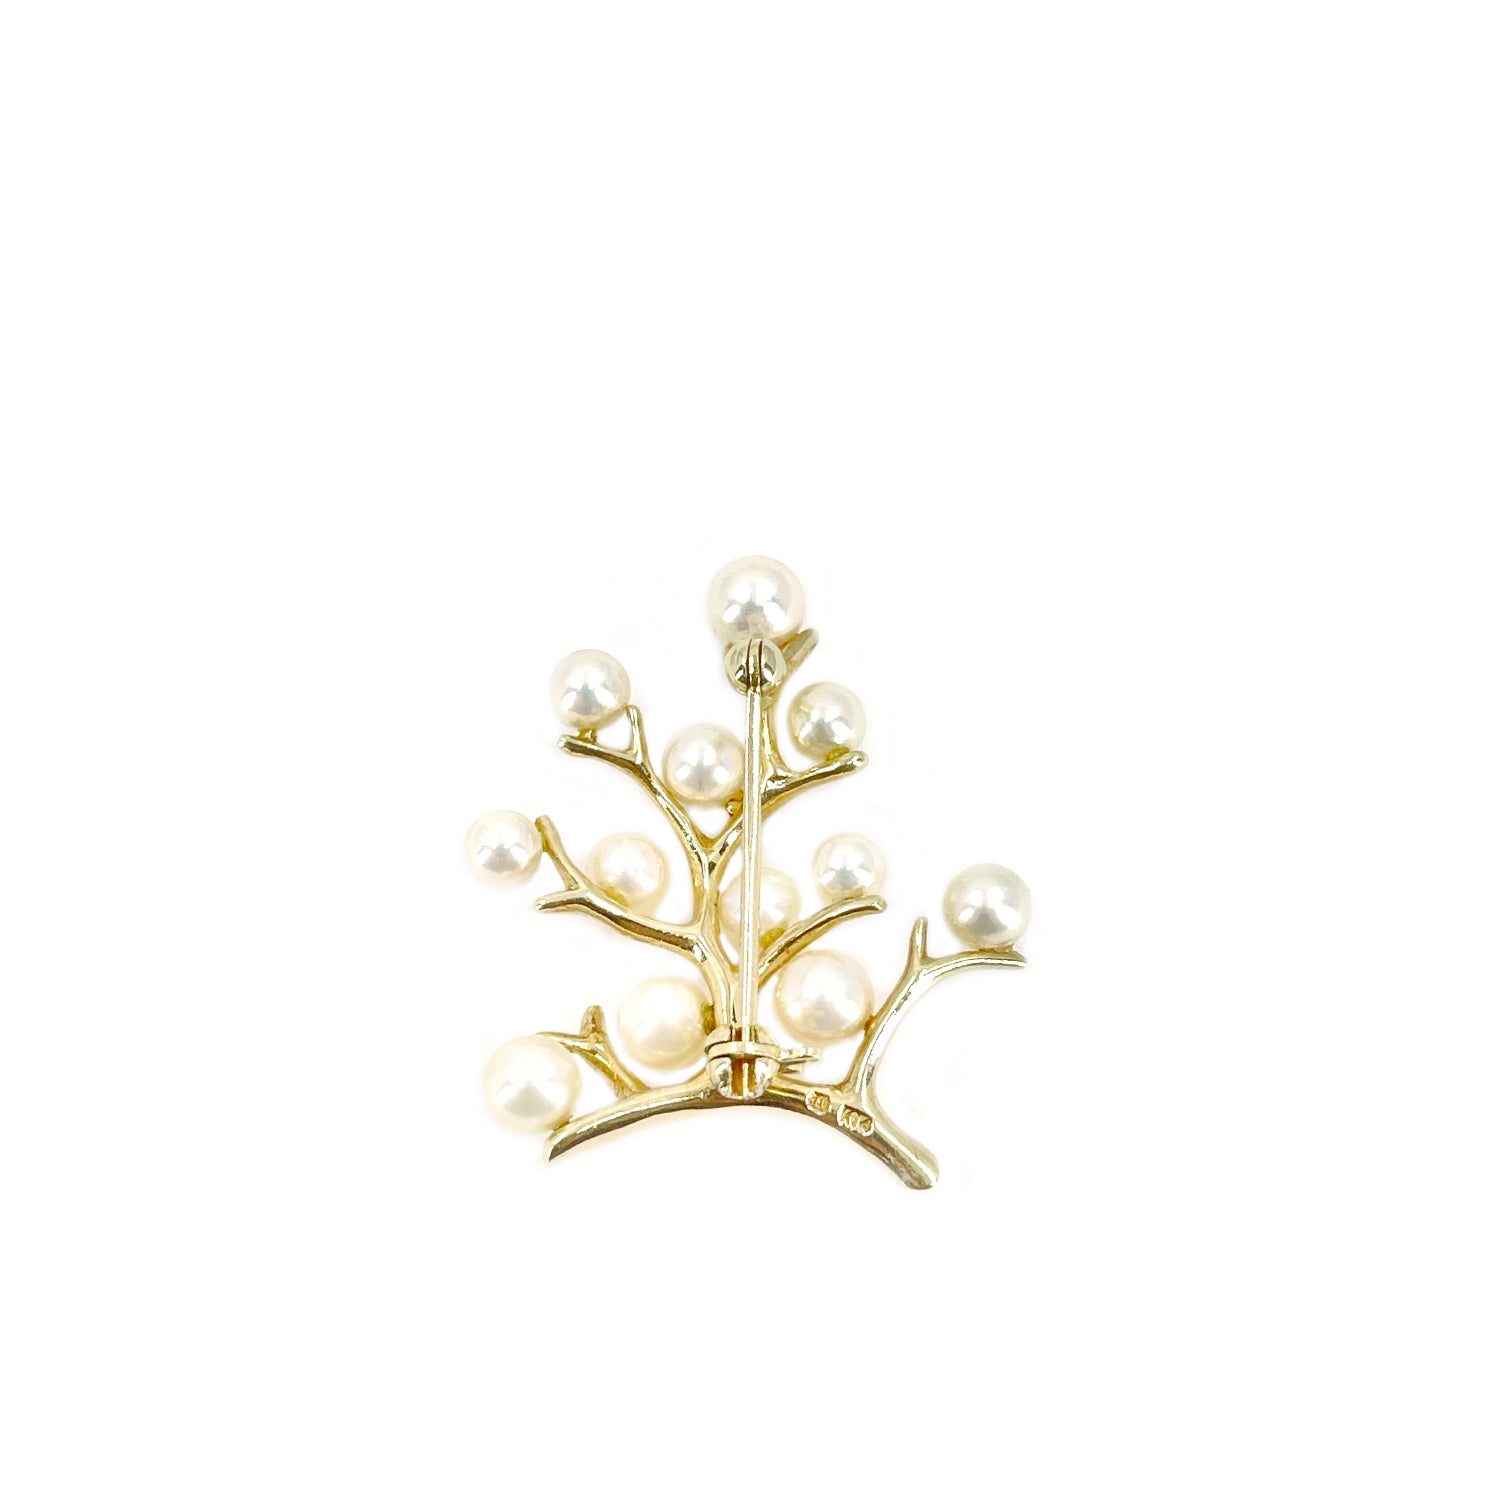 Mikimoto Tree of Life Japanese Cultured Saltwater Akoya Pearl Vintage Brooch- 14K Yellow Gold